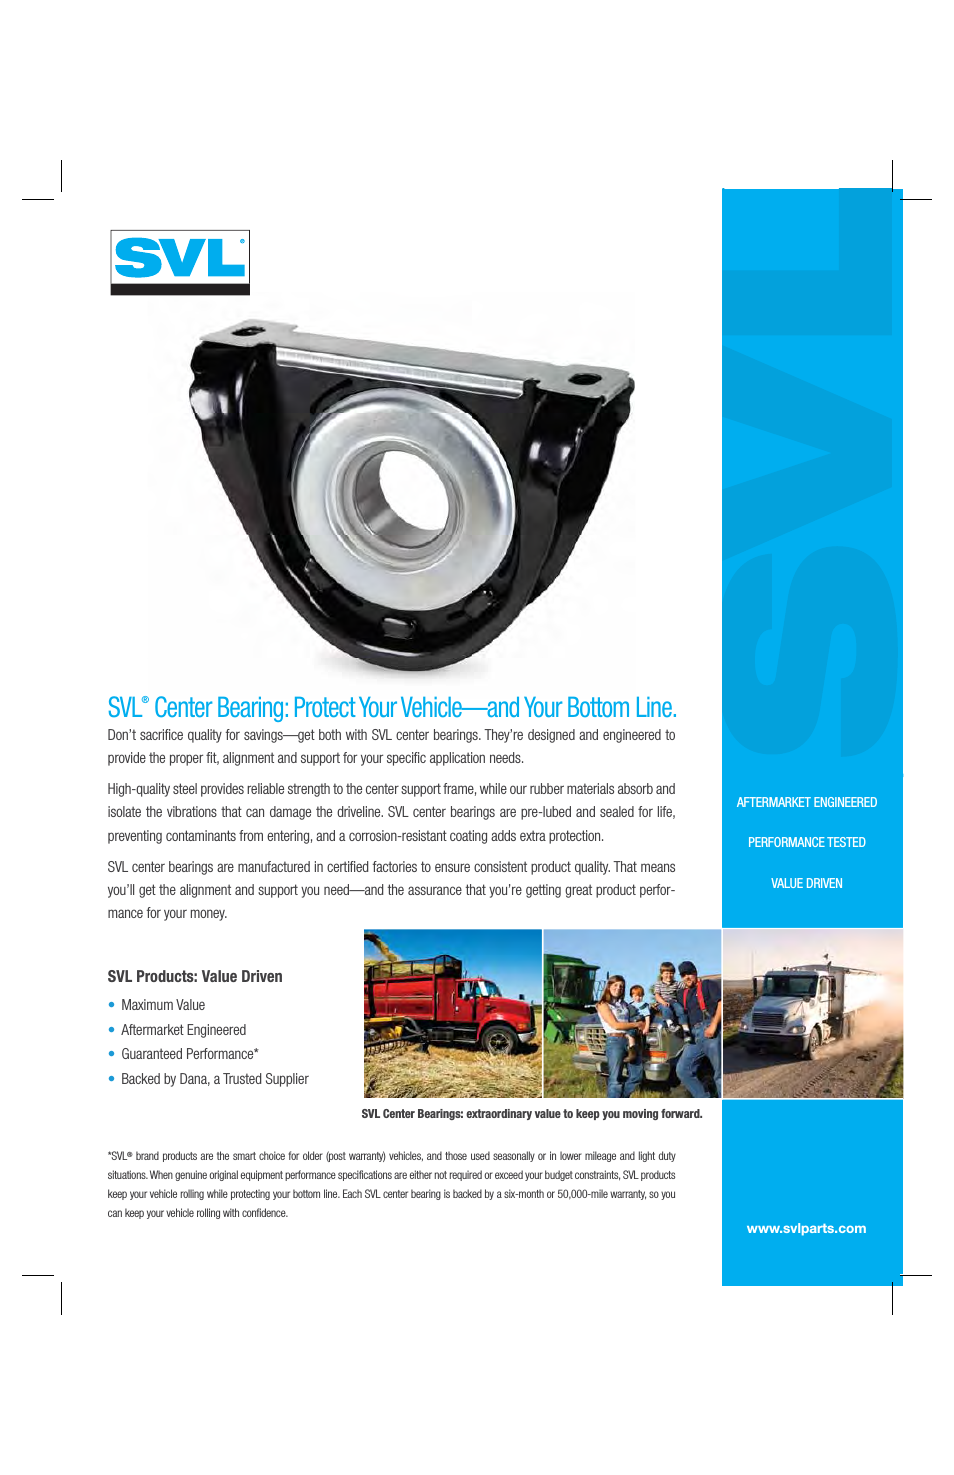 SVL Center Bearing: Protect Your Vehicle—and Your Bottom Line